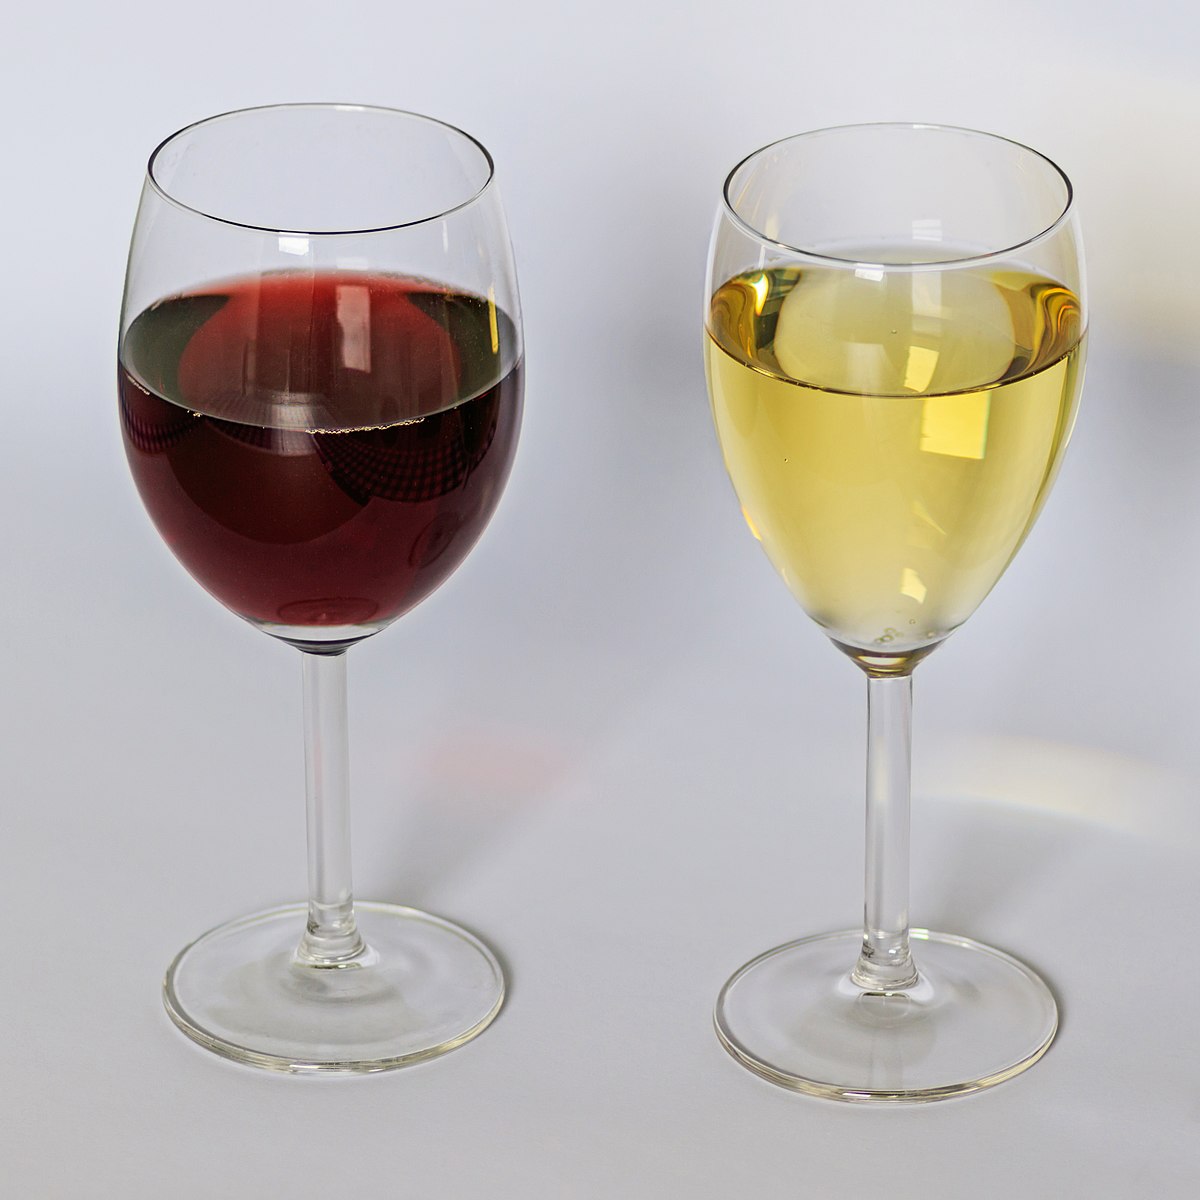 A glass of white wine and a glass of red wine